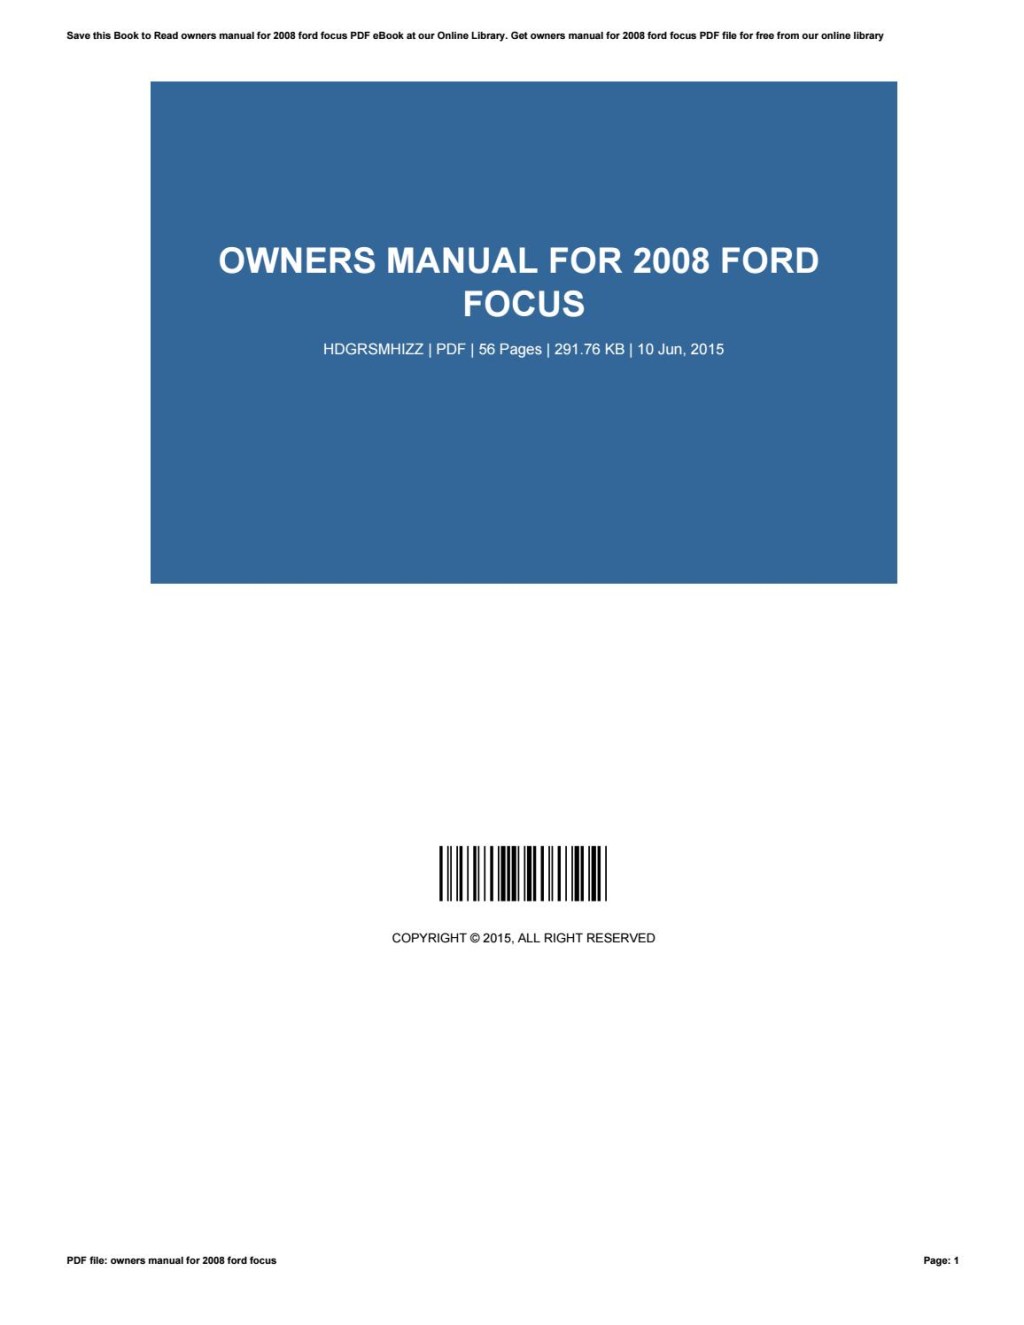 Picture of: Owners manual for  ford focus by RichardBernal – Issuu